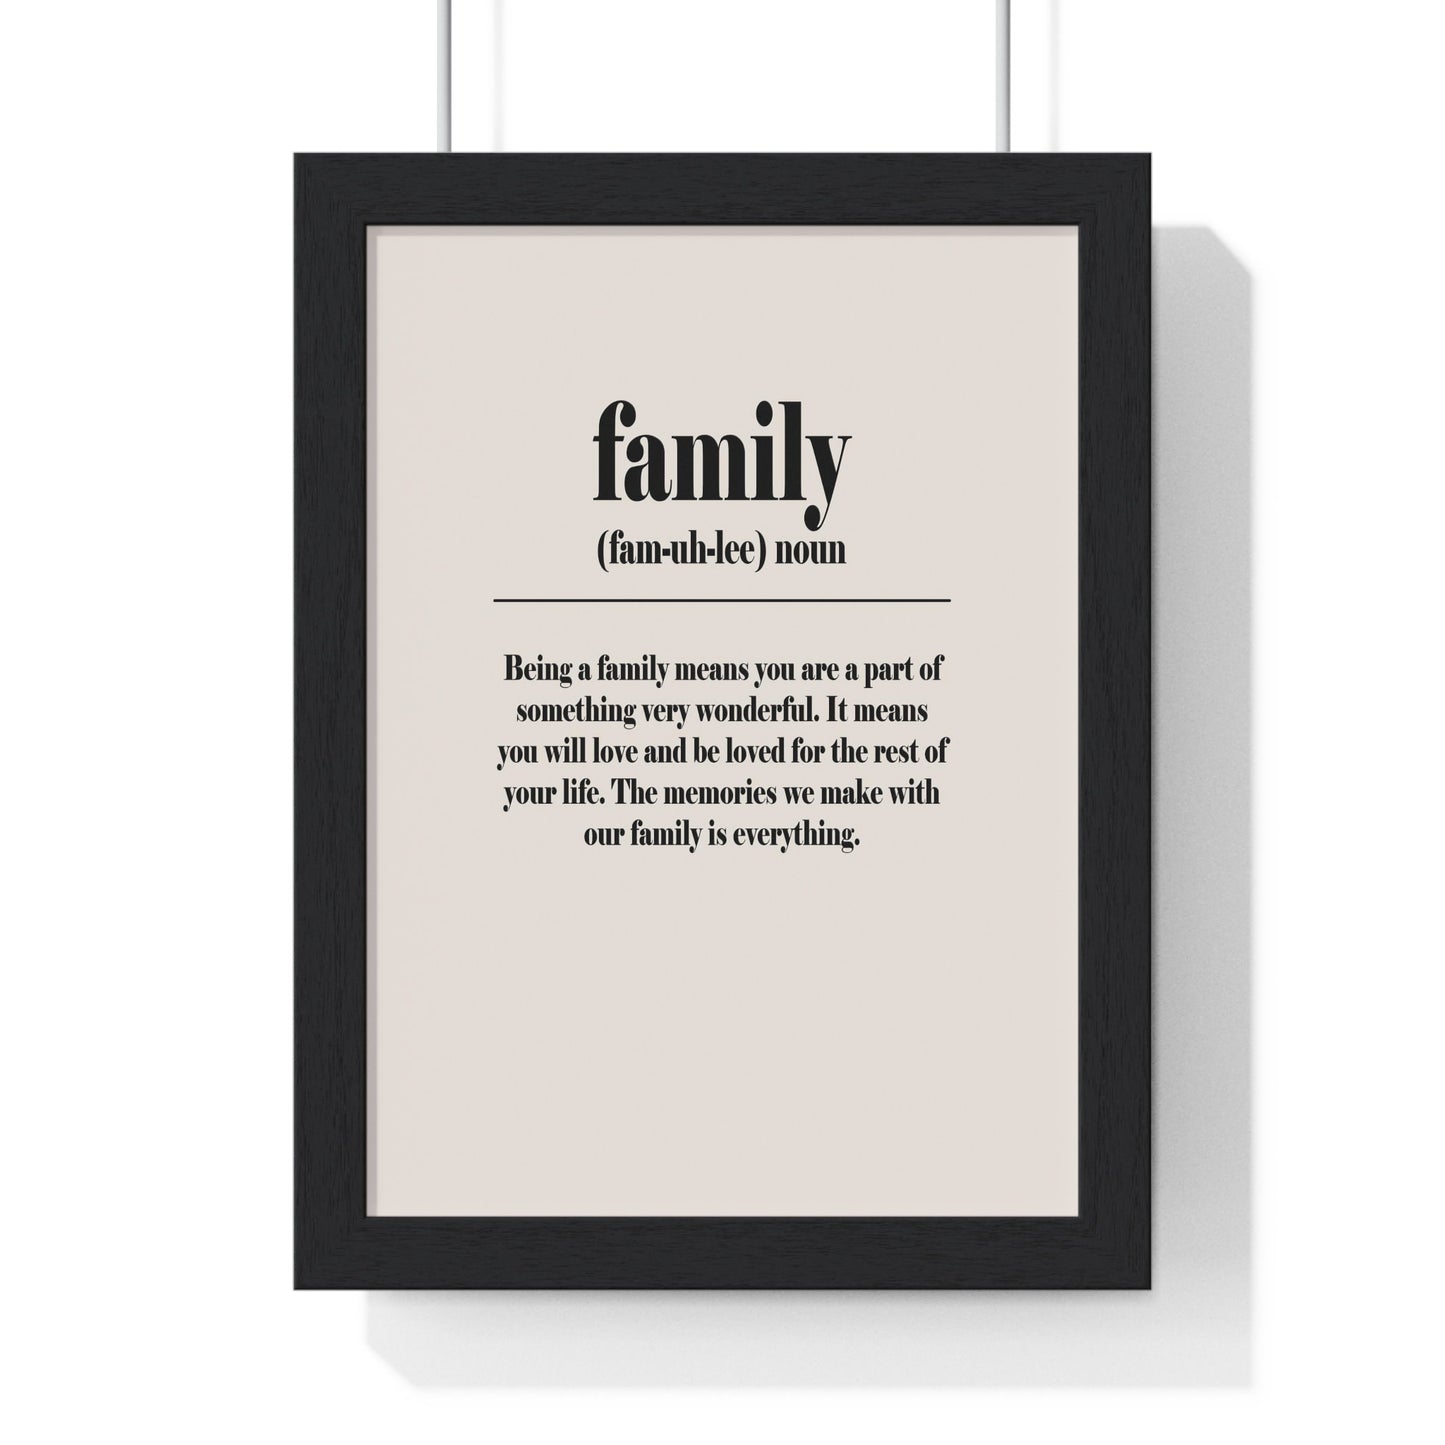 Family Definition Poster Wall Art